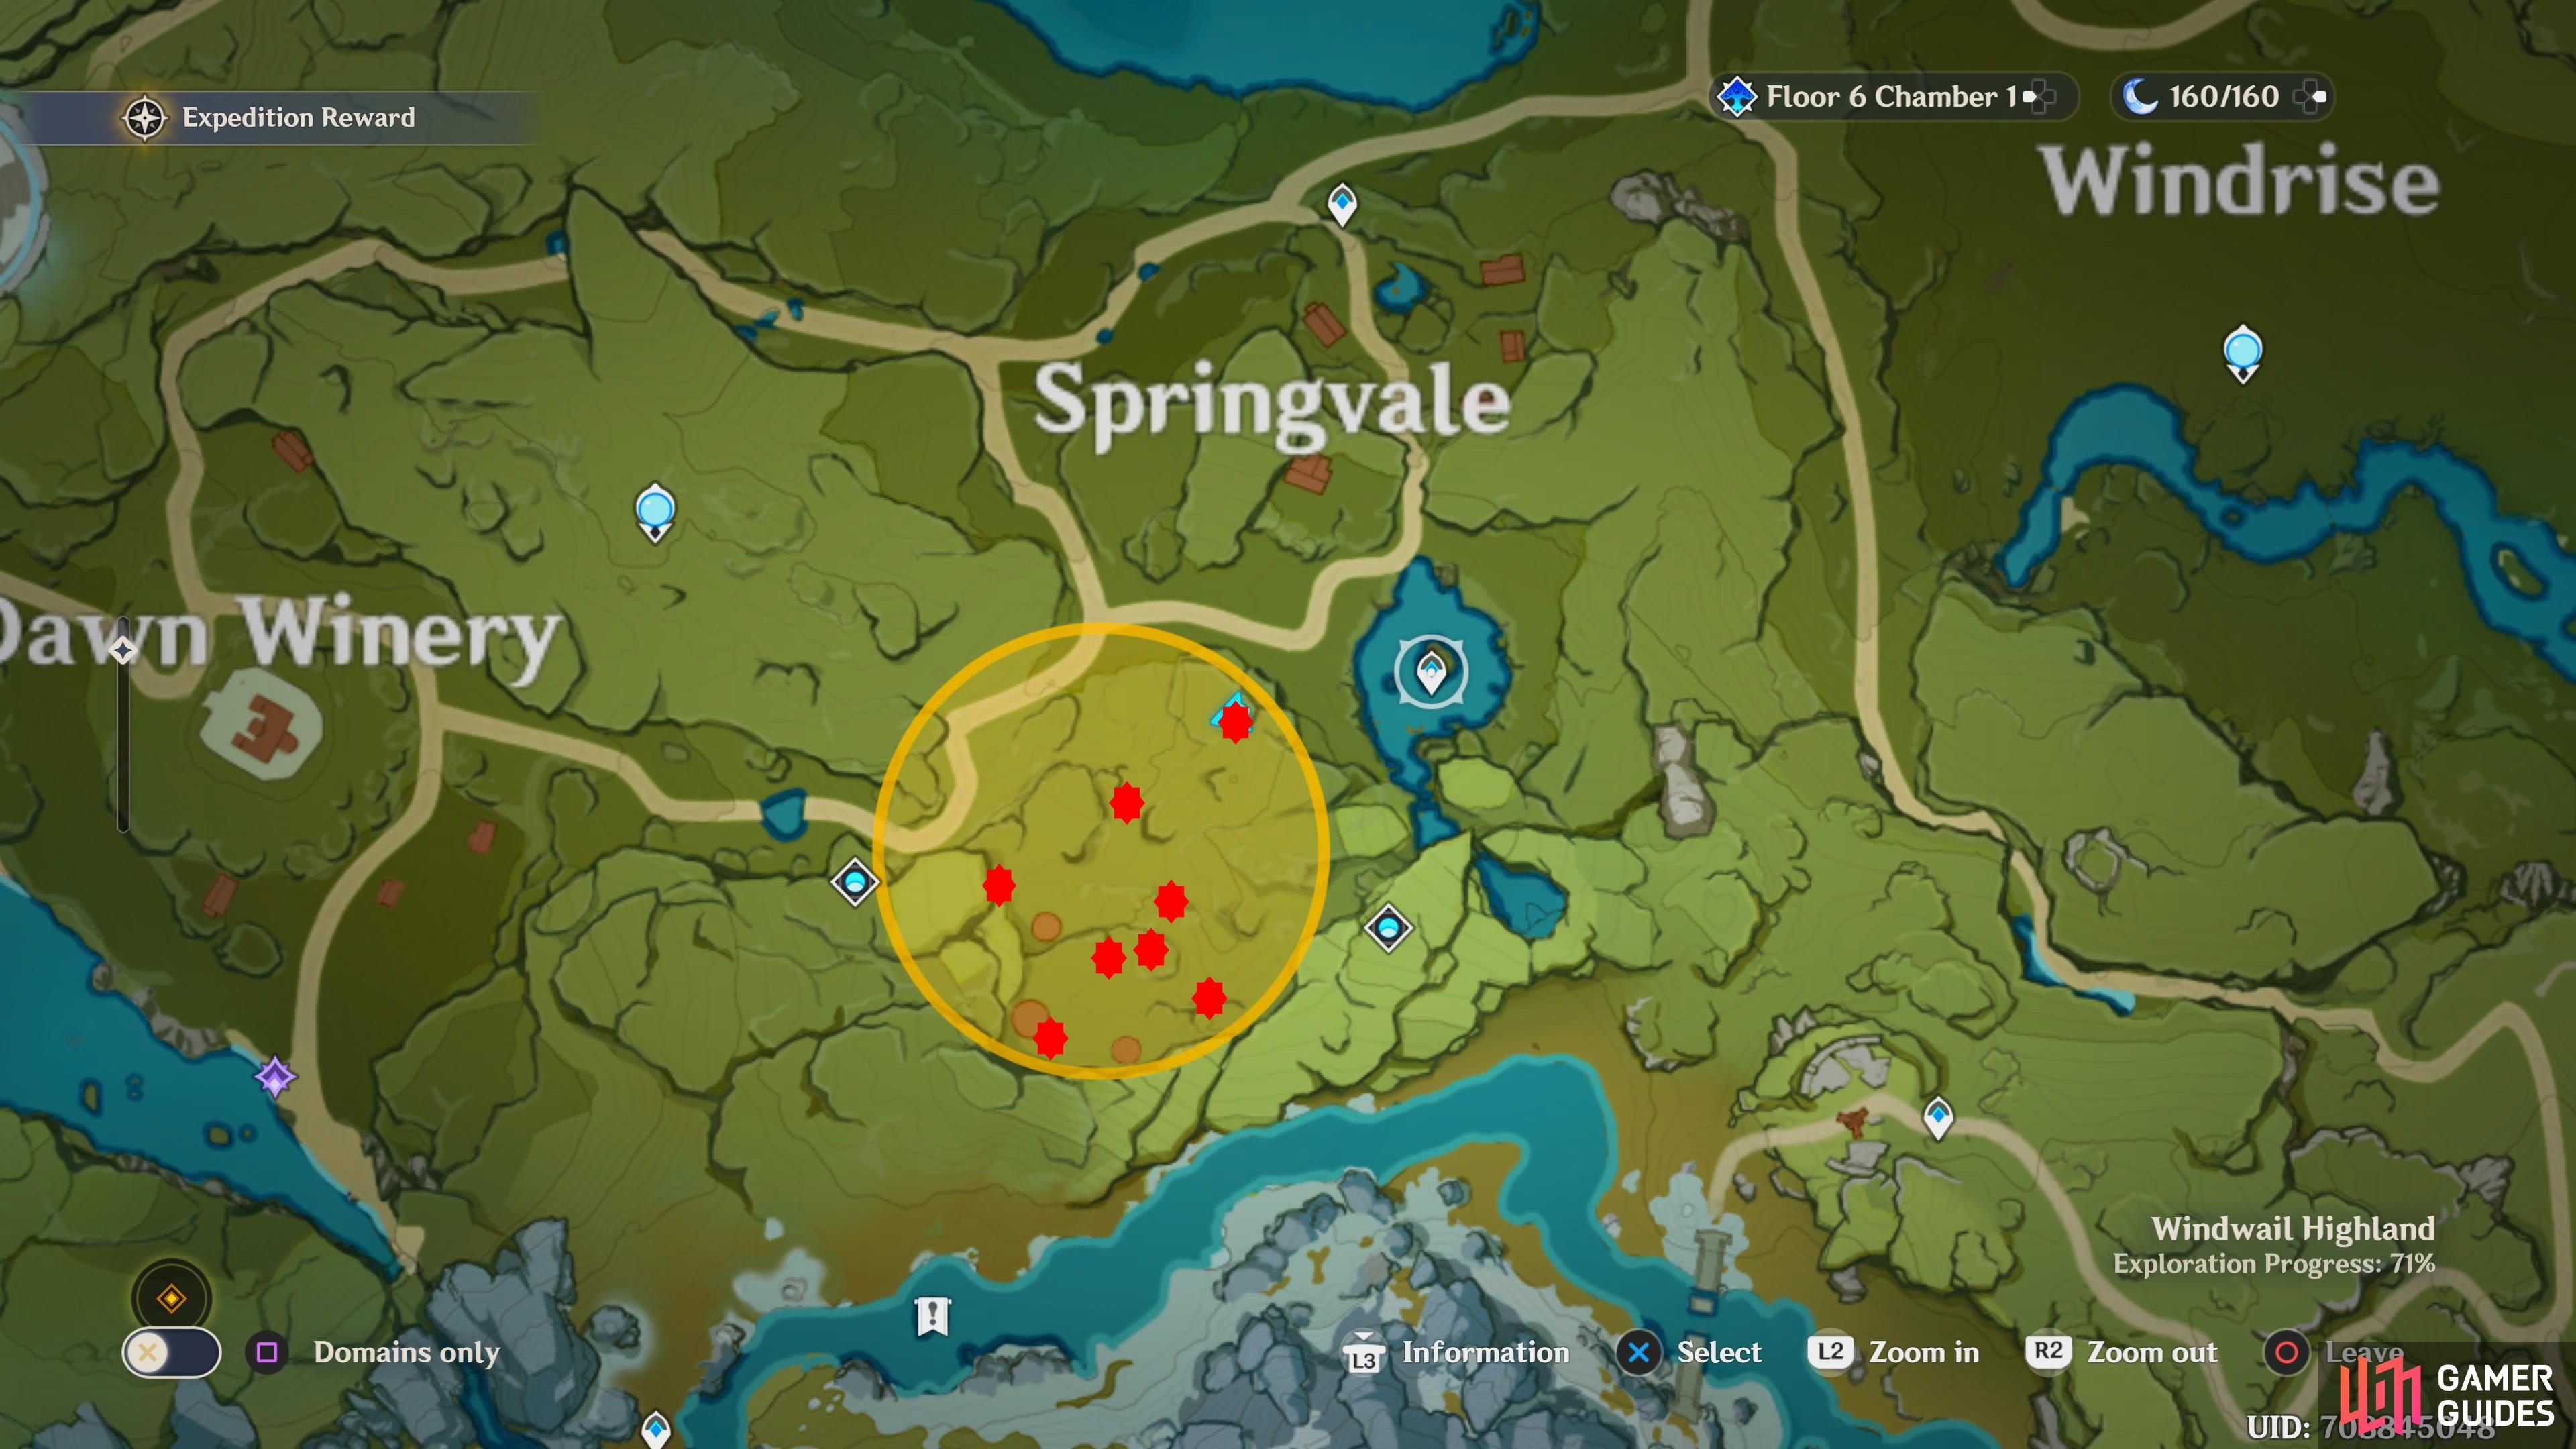 The Treasures can be found where the red dots are on this map.